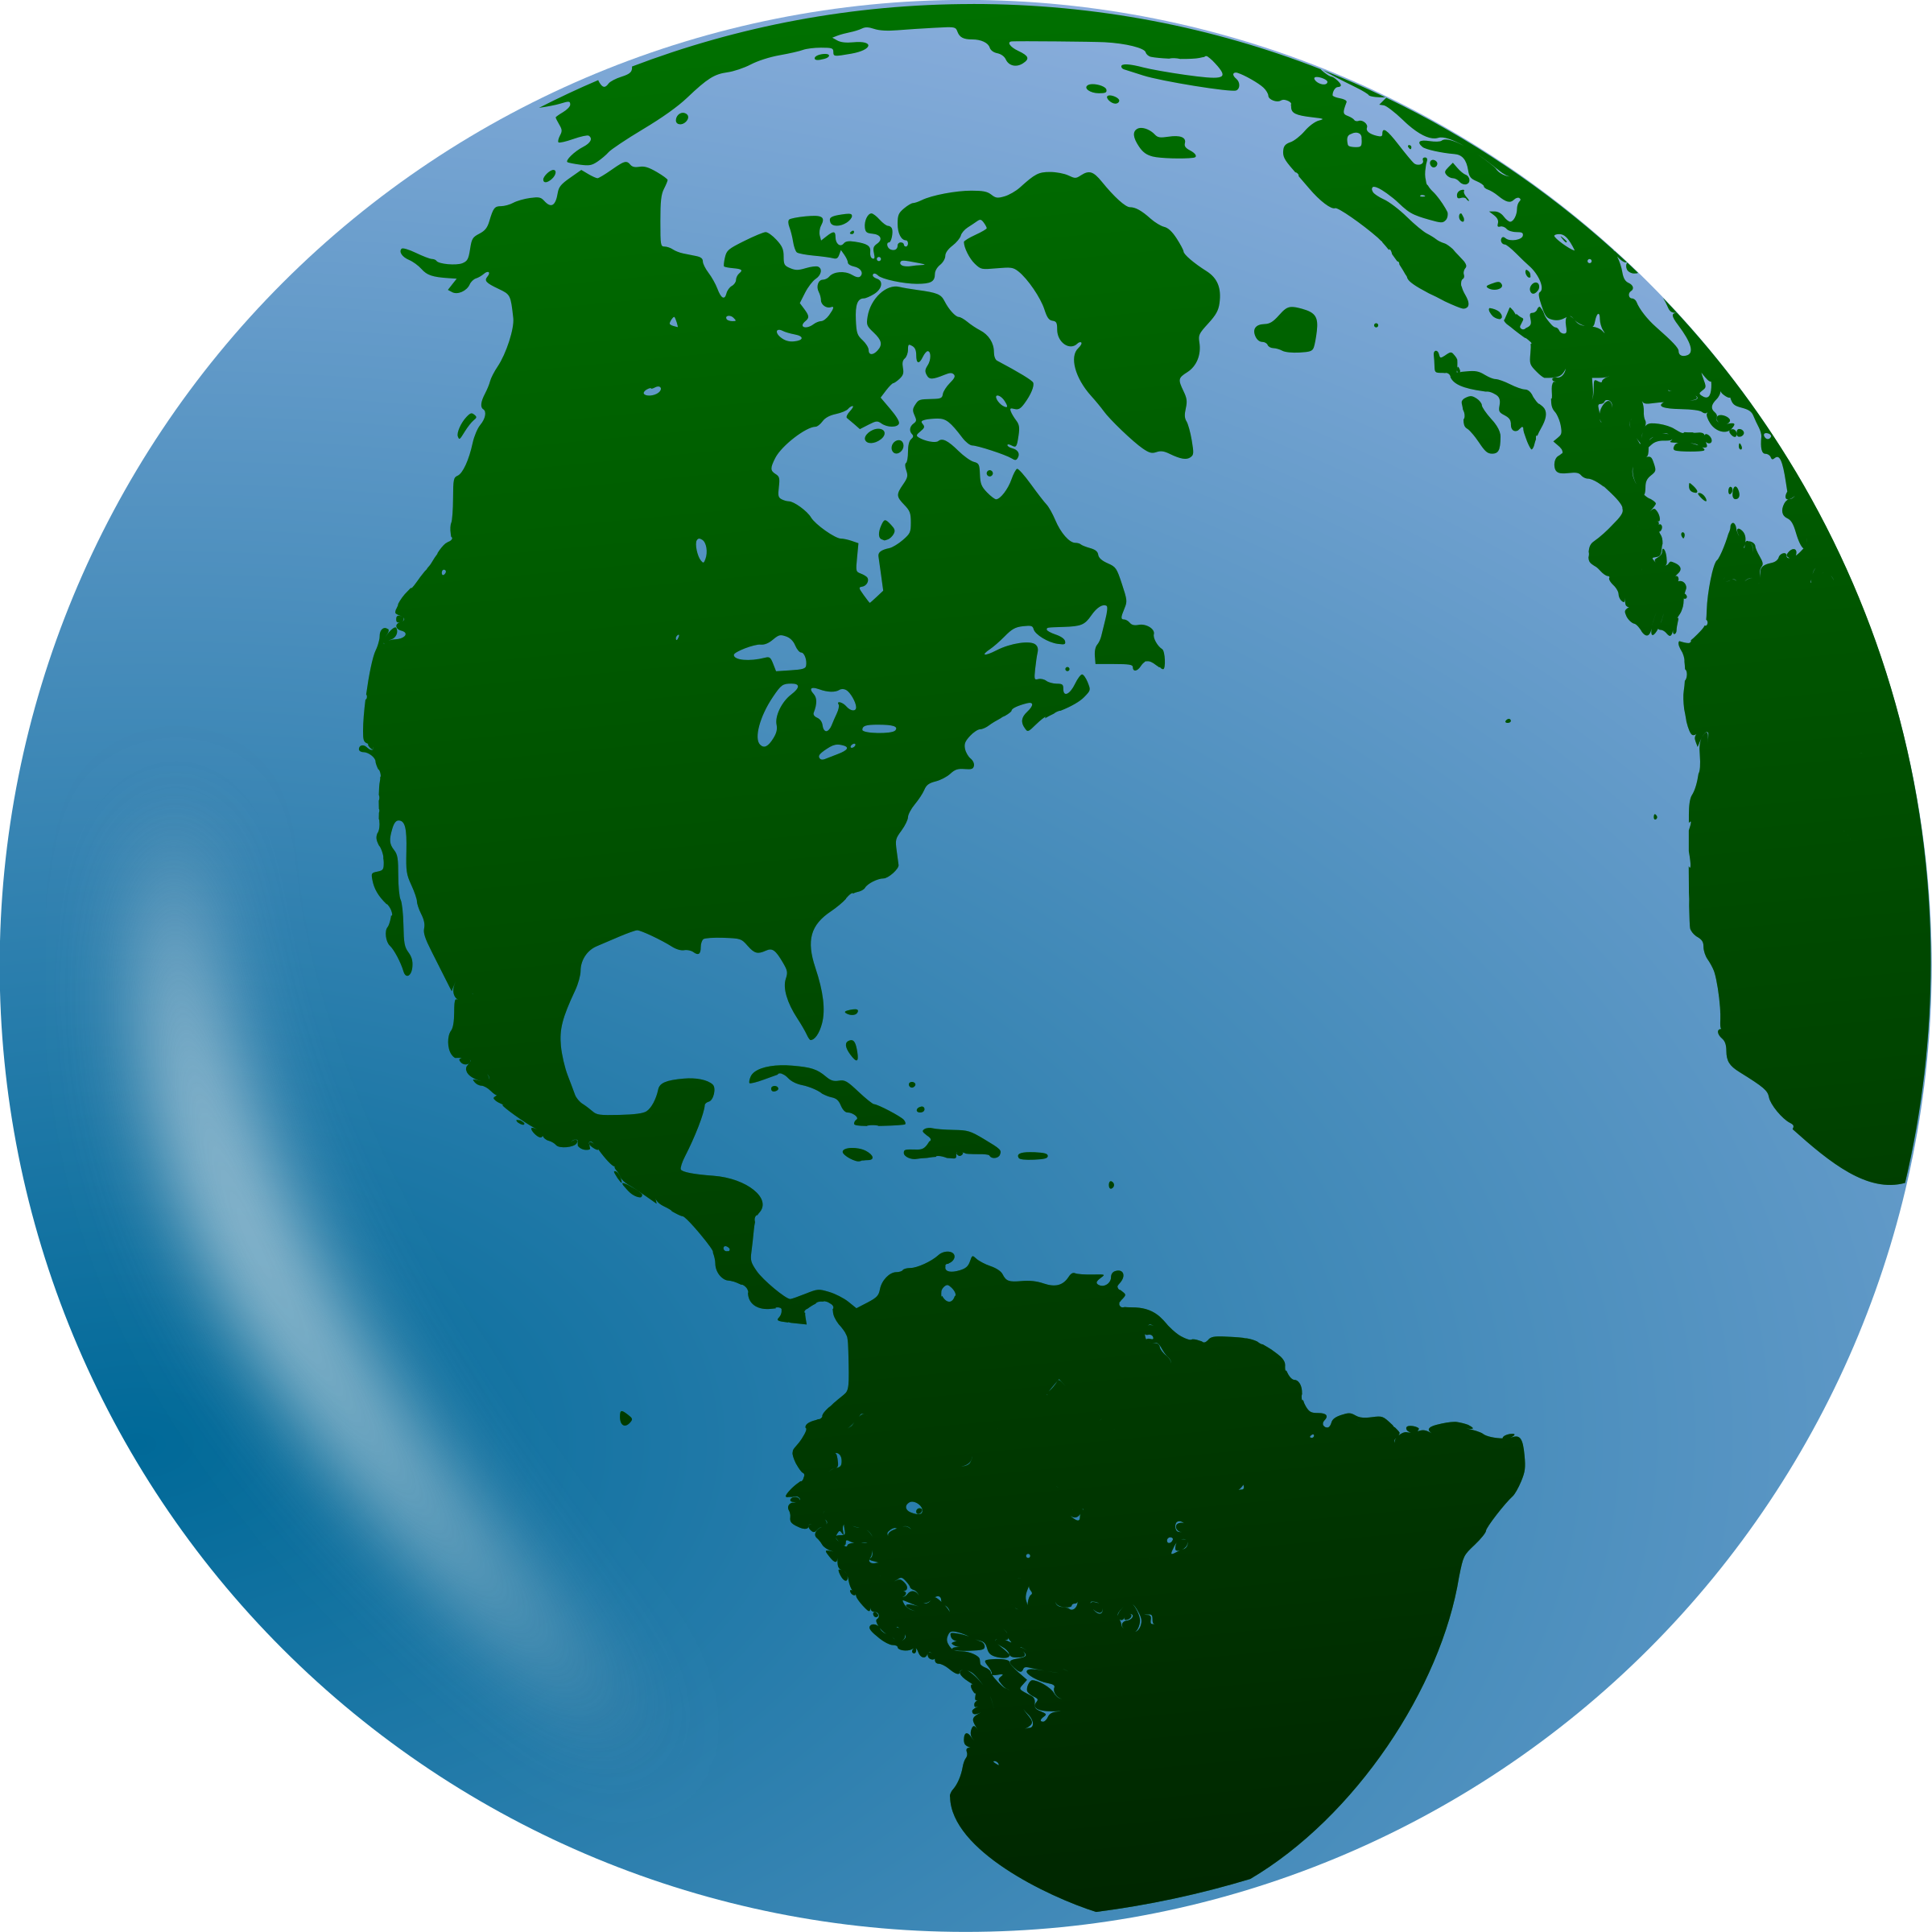 World Globe Images Hd Image Clipart